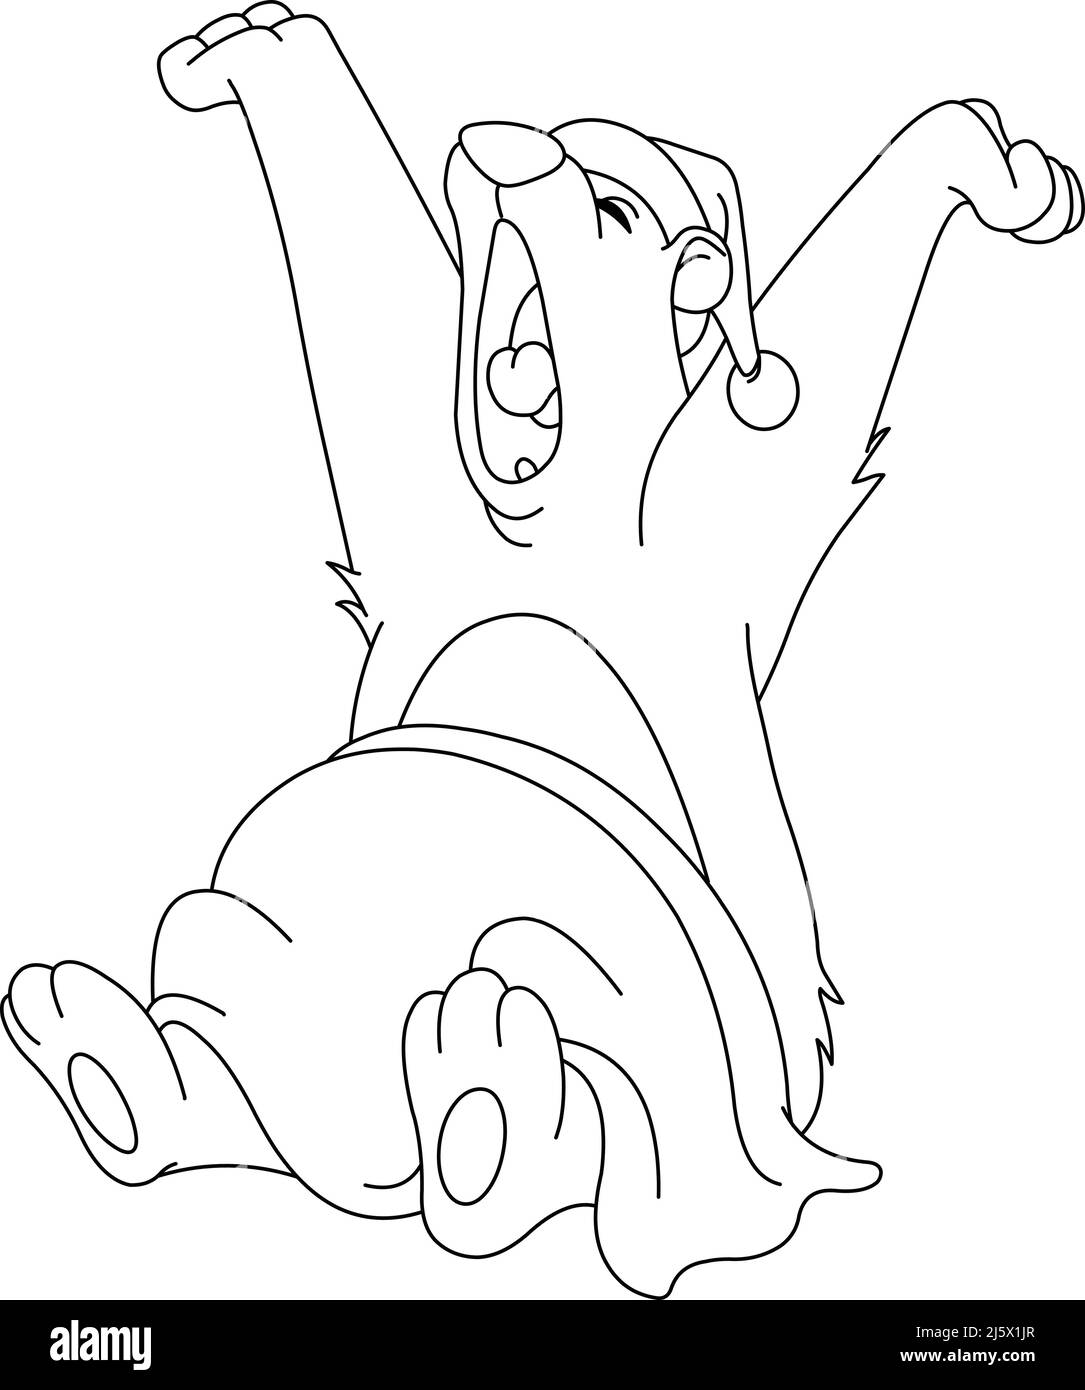 Outlined bear waking up from hibernation yawning and stretching. Vector line art illustration coloring page. Stock Vector